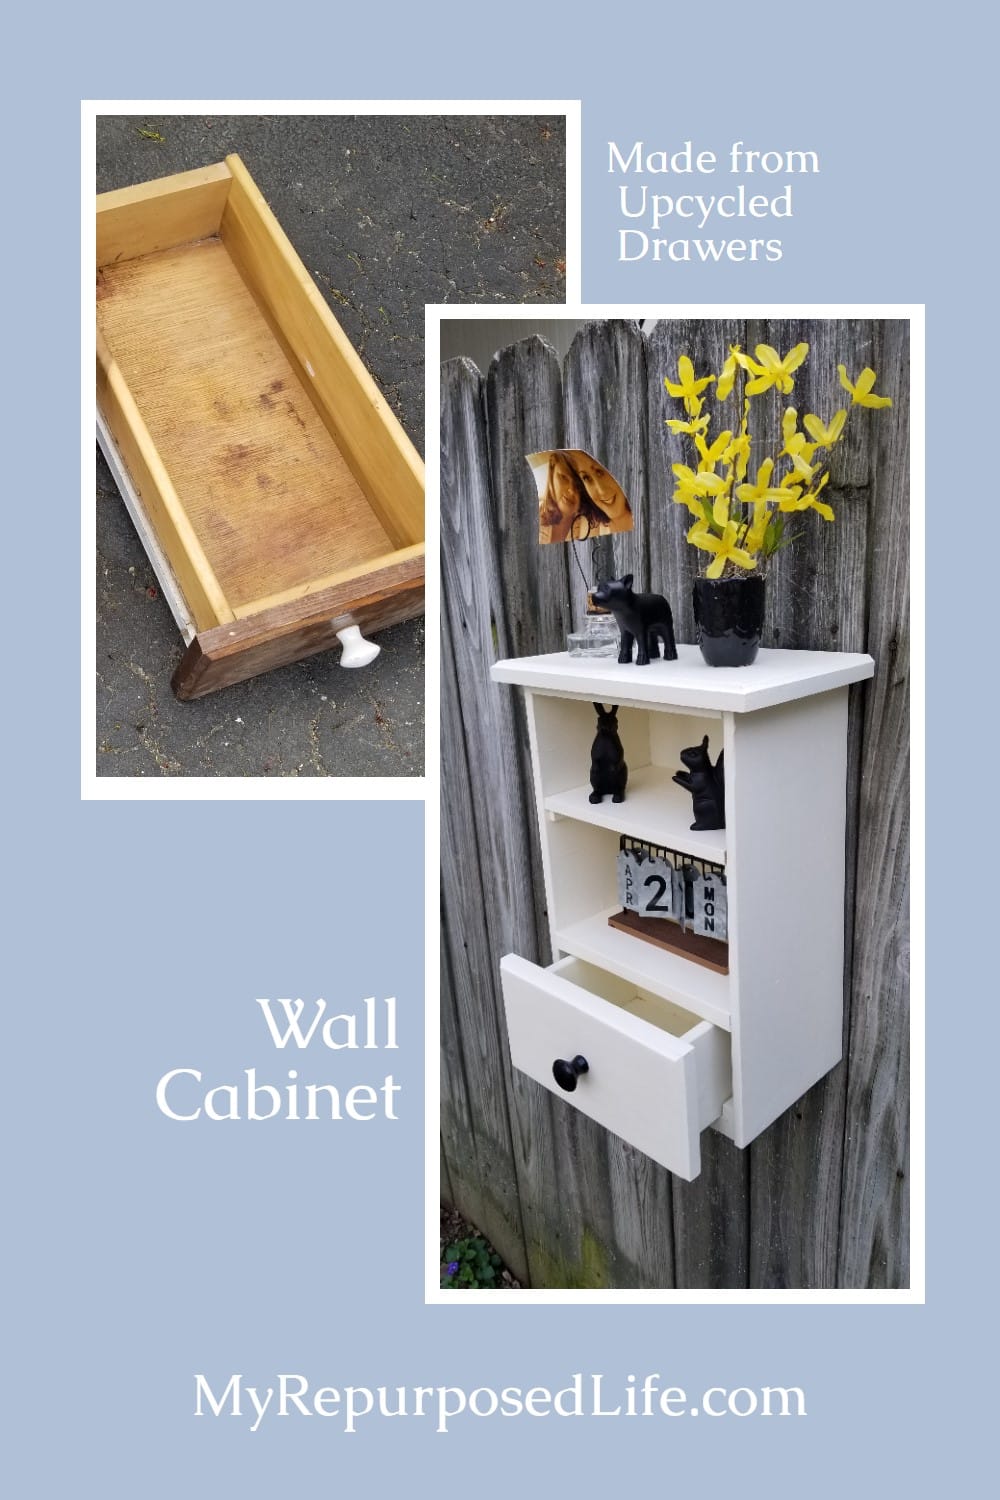 How to make a wall cabinet out of repurposed drawers. Use one drawer vertically, cut the other drawer down to size and voila! You have an awesome display cabinet with a drawer. Directions for you to make something similar! Repurpose those drawers you have hanging around. #MyRepurposedLife #repurposed #furniture #drawers #cabinet #homedecor via @repurposedlife